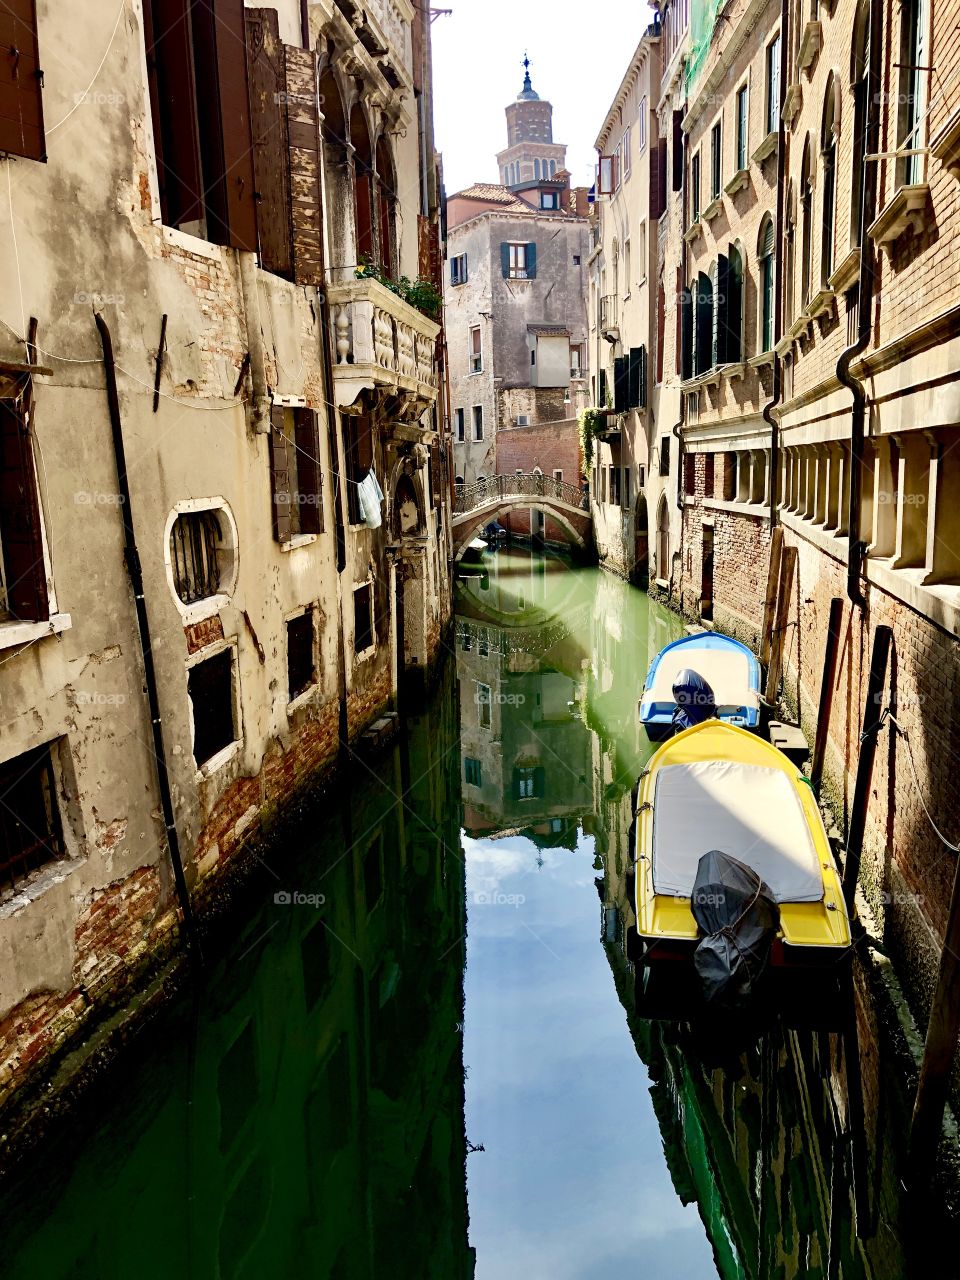 It’s easy to get lost in Venice, but it is also half the fun